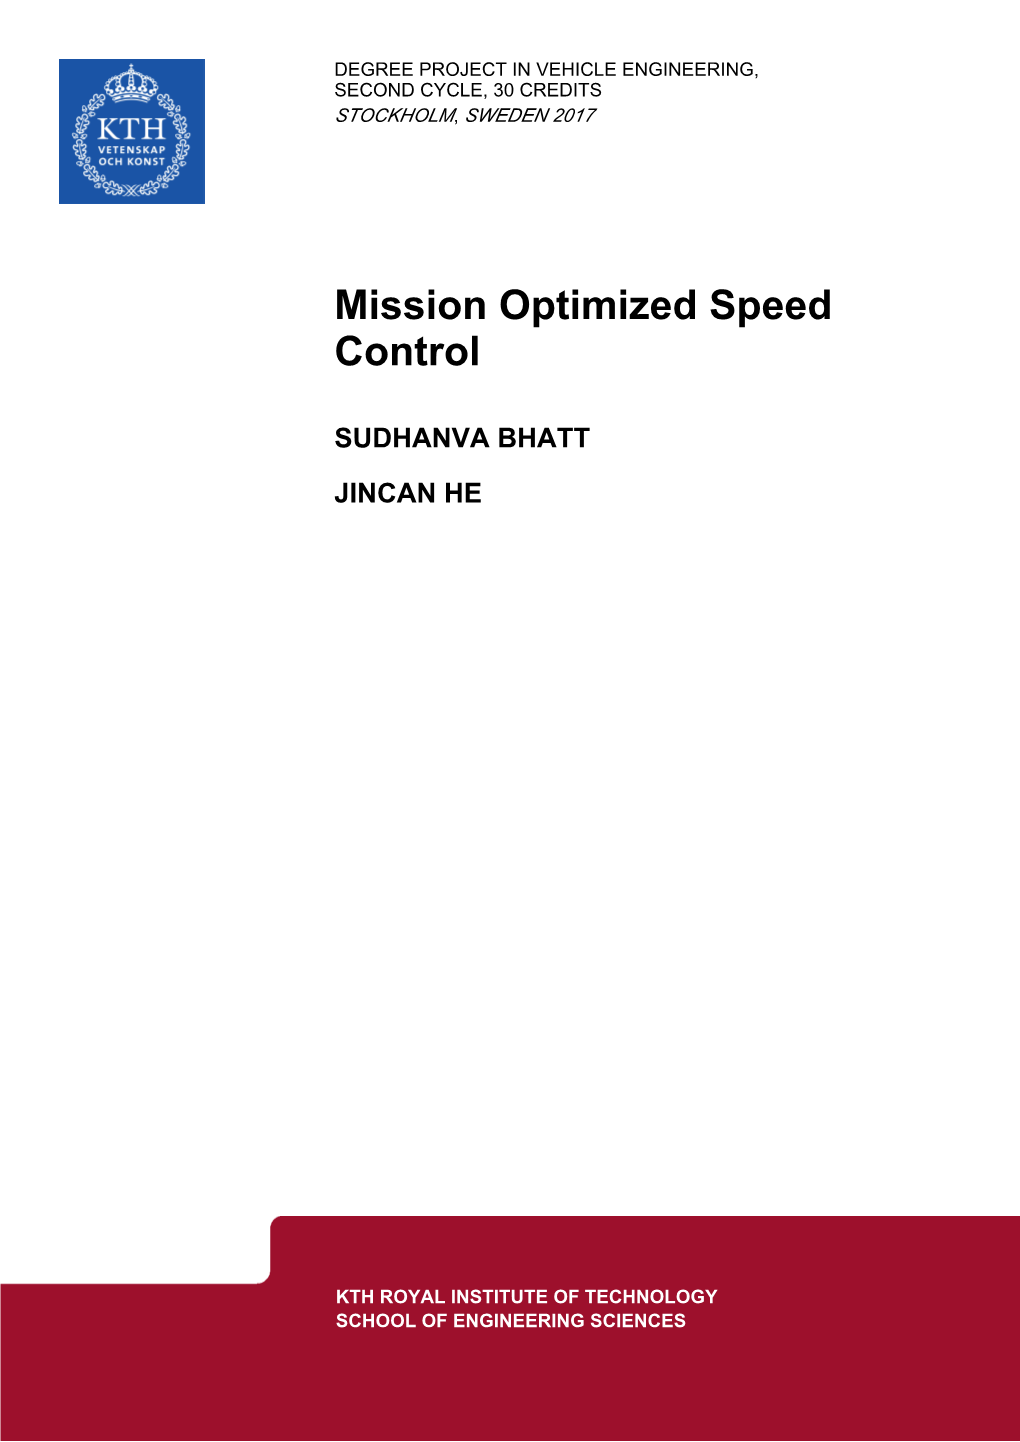 Mission Optimized Speed Control